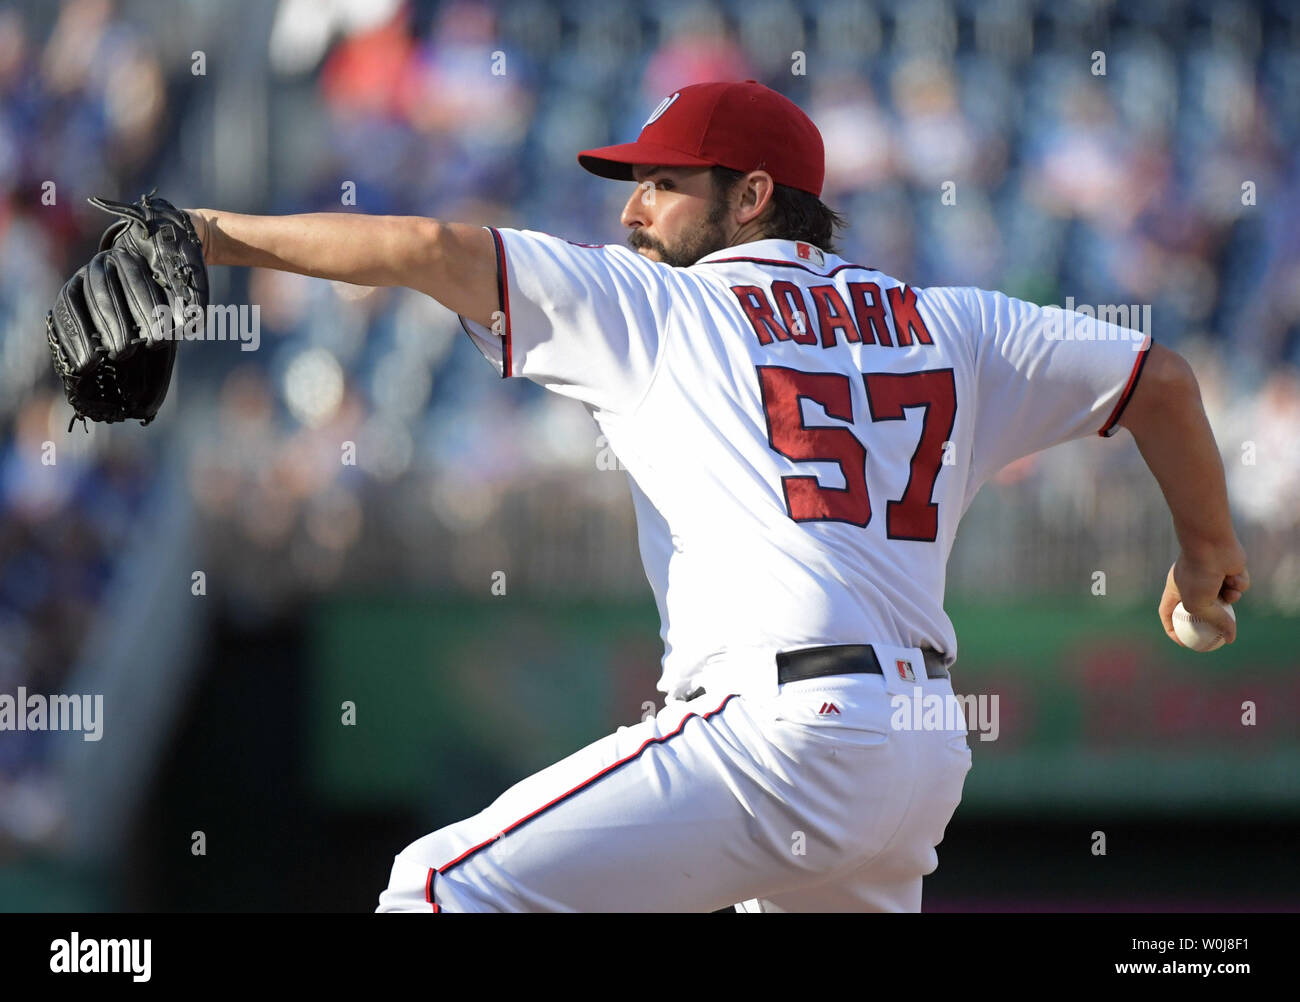 Washington Nationals pitcher Tanner Roark pitches against the New York Mets in the fourth inning at Nationals Park in Washington, D.C. on September 14, 2106. Photo by Kevin Dietsch/UPI Stock Photo